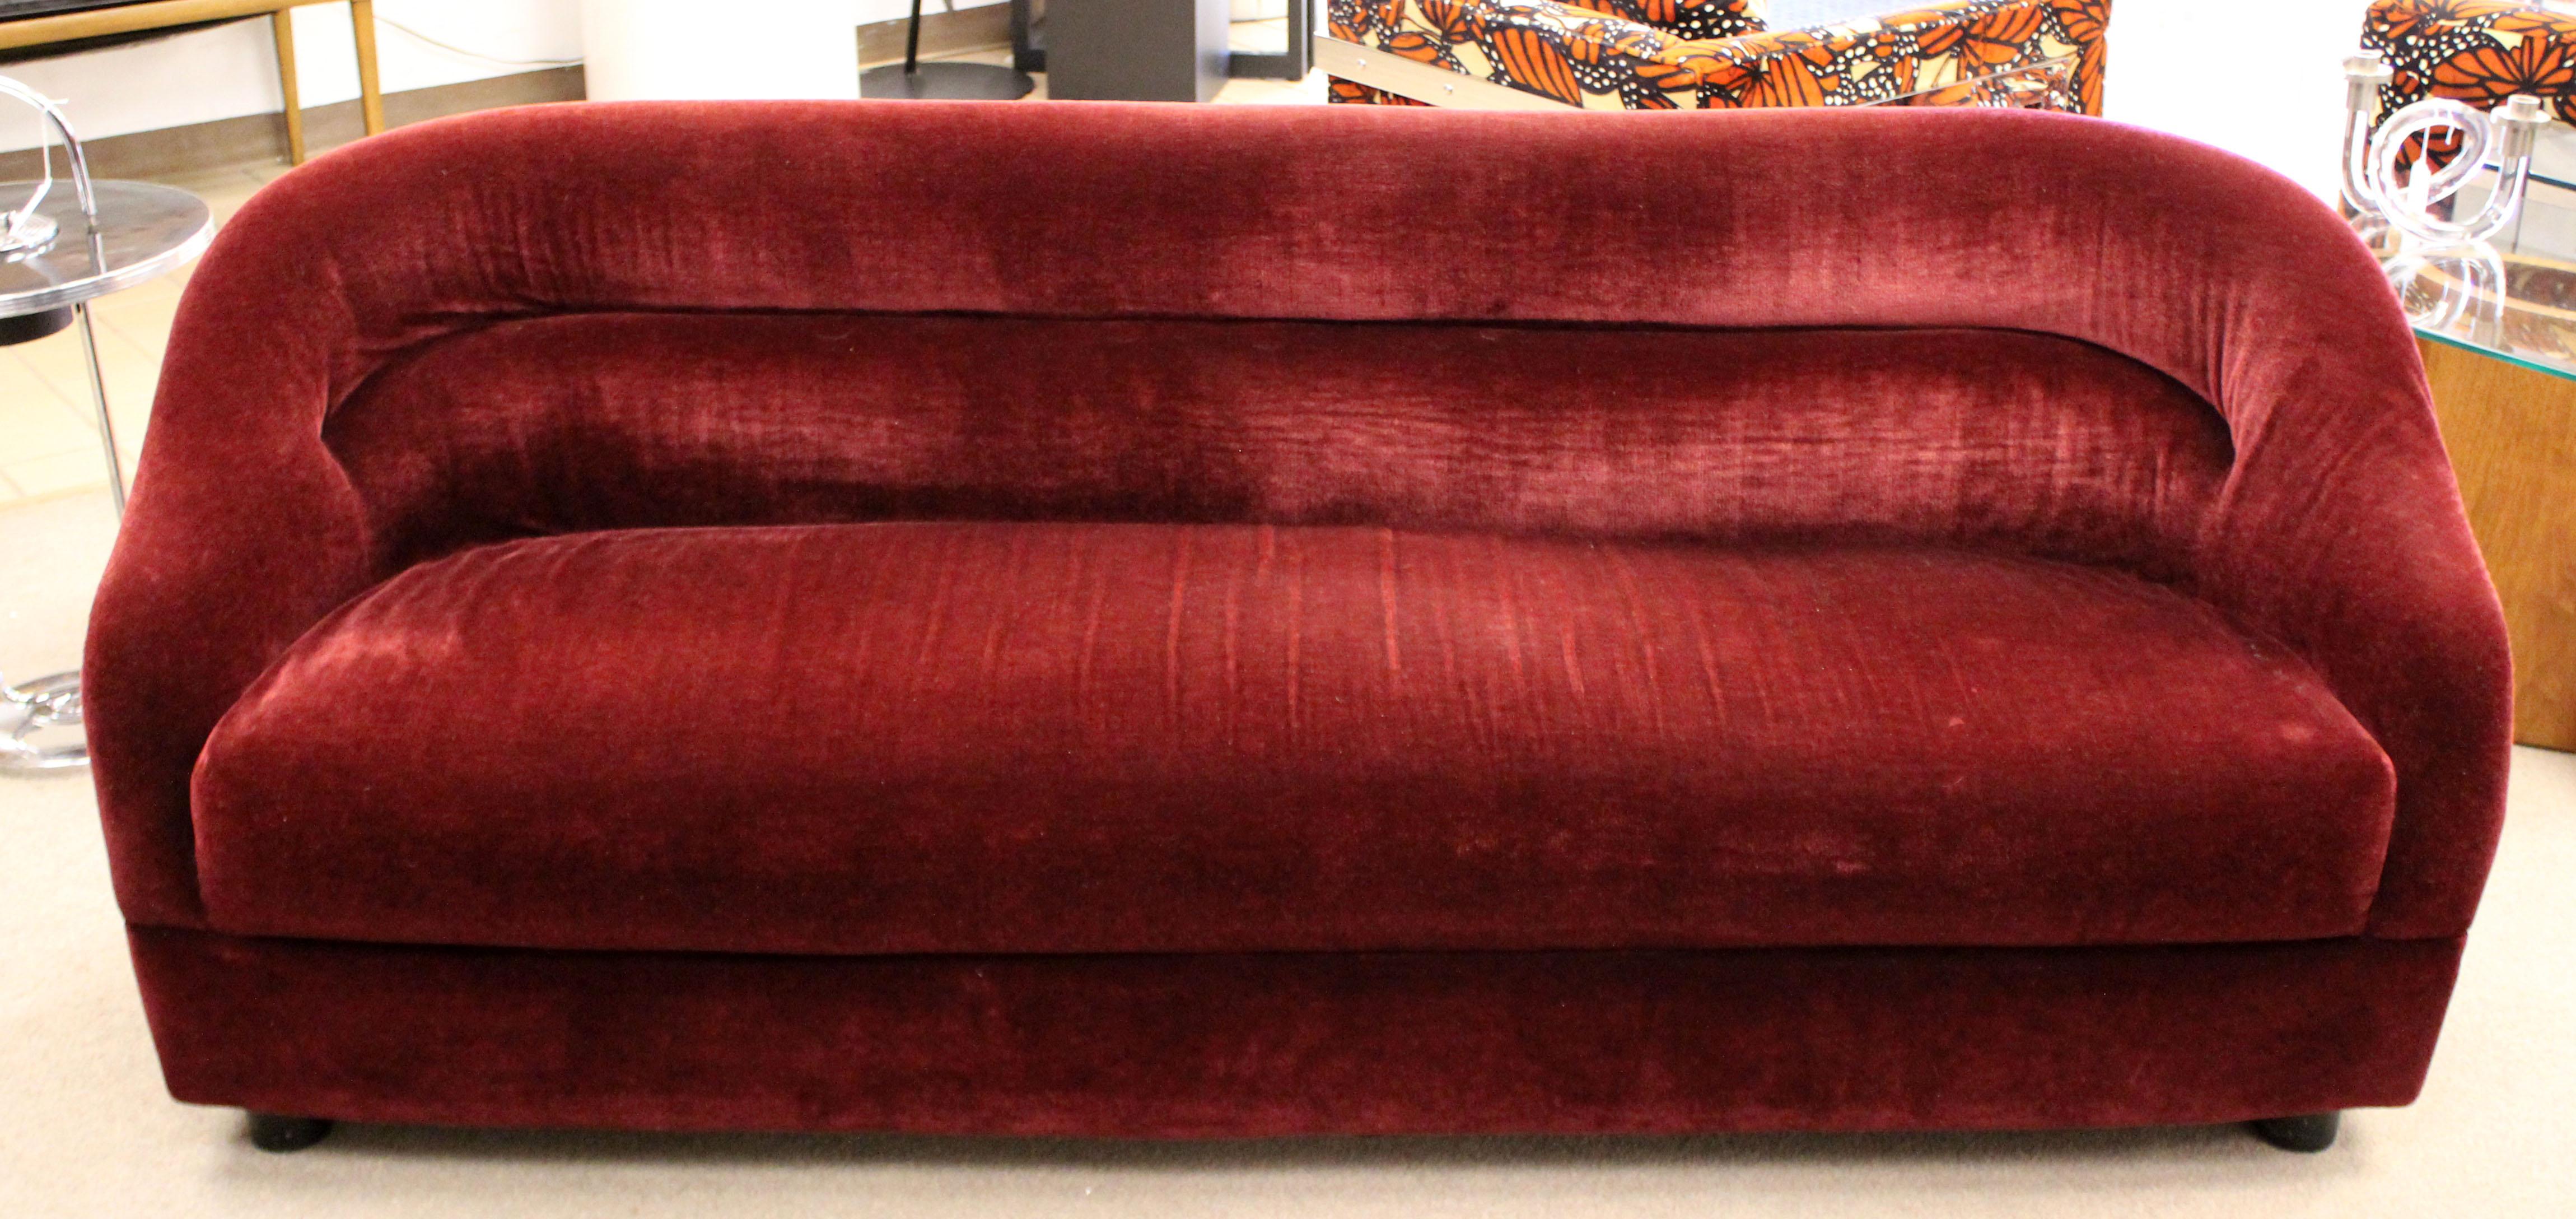 For your consideration is a stylishly chic, red mohair blend Art Deco style loveseat settee, signed Mary M, for David-Edward Furniture. In excellent condition. The dimensions are 74